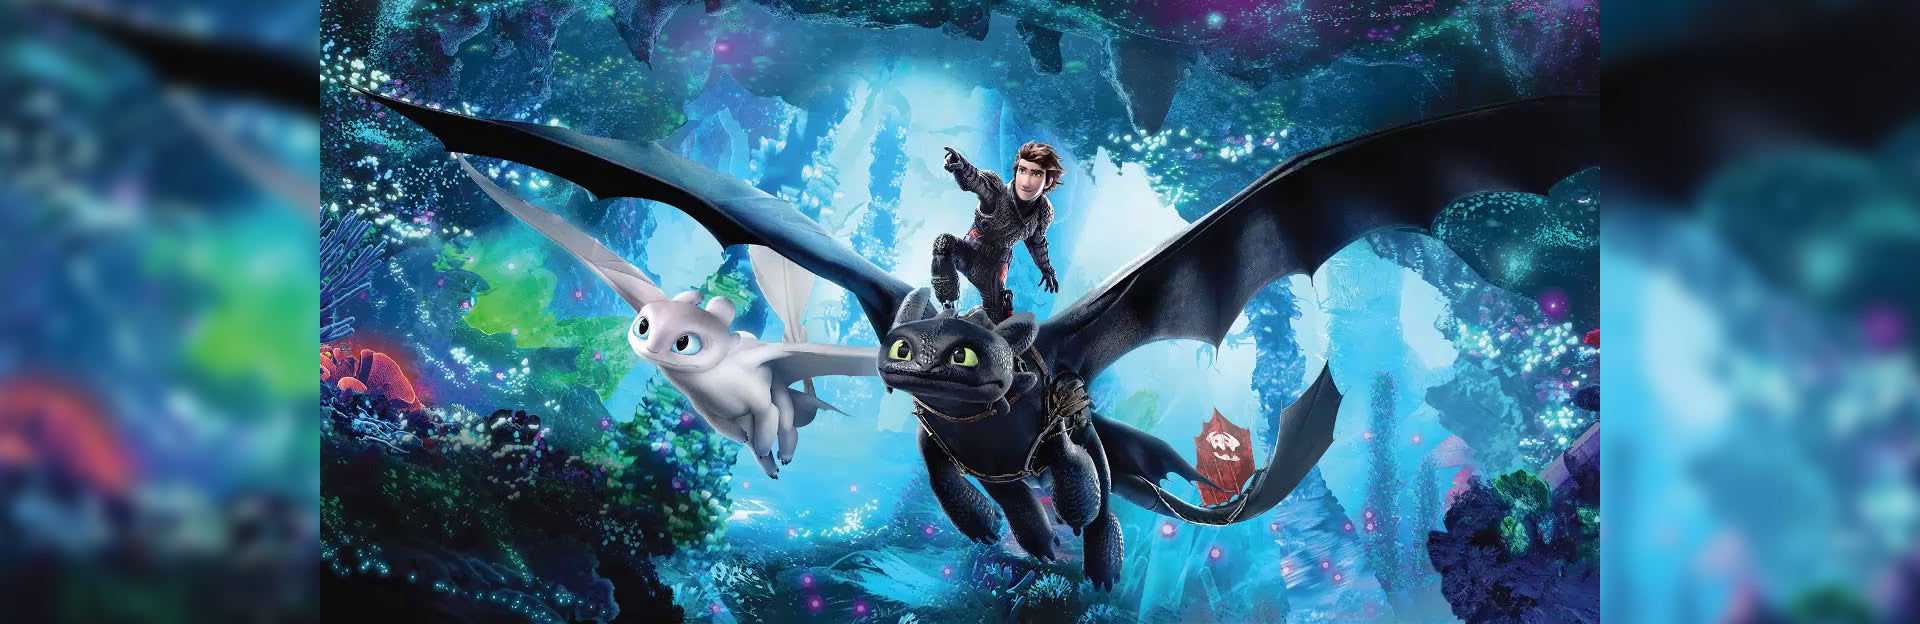 toothless how to train your dragon 2 blue